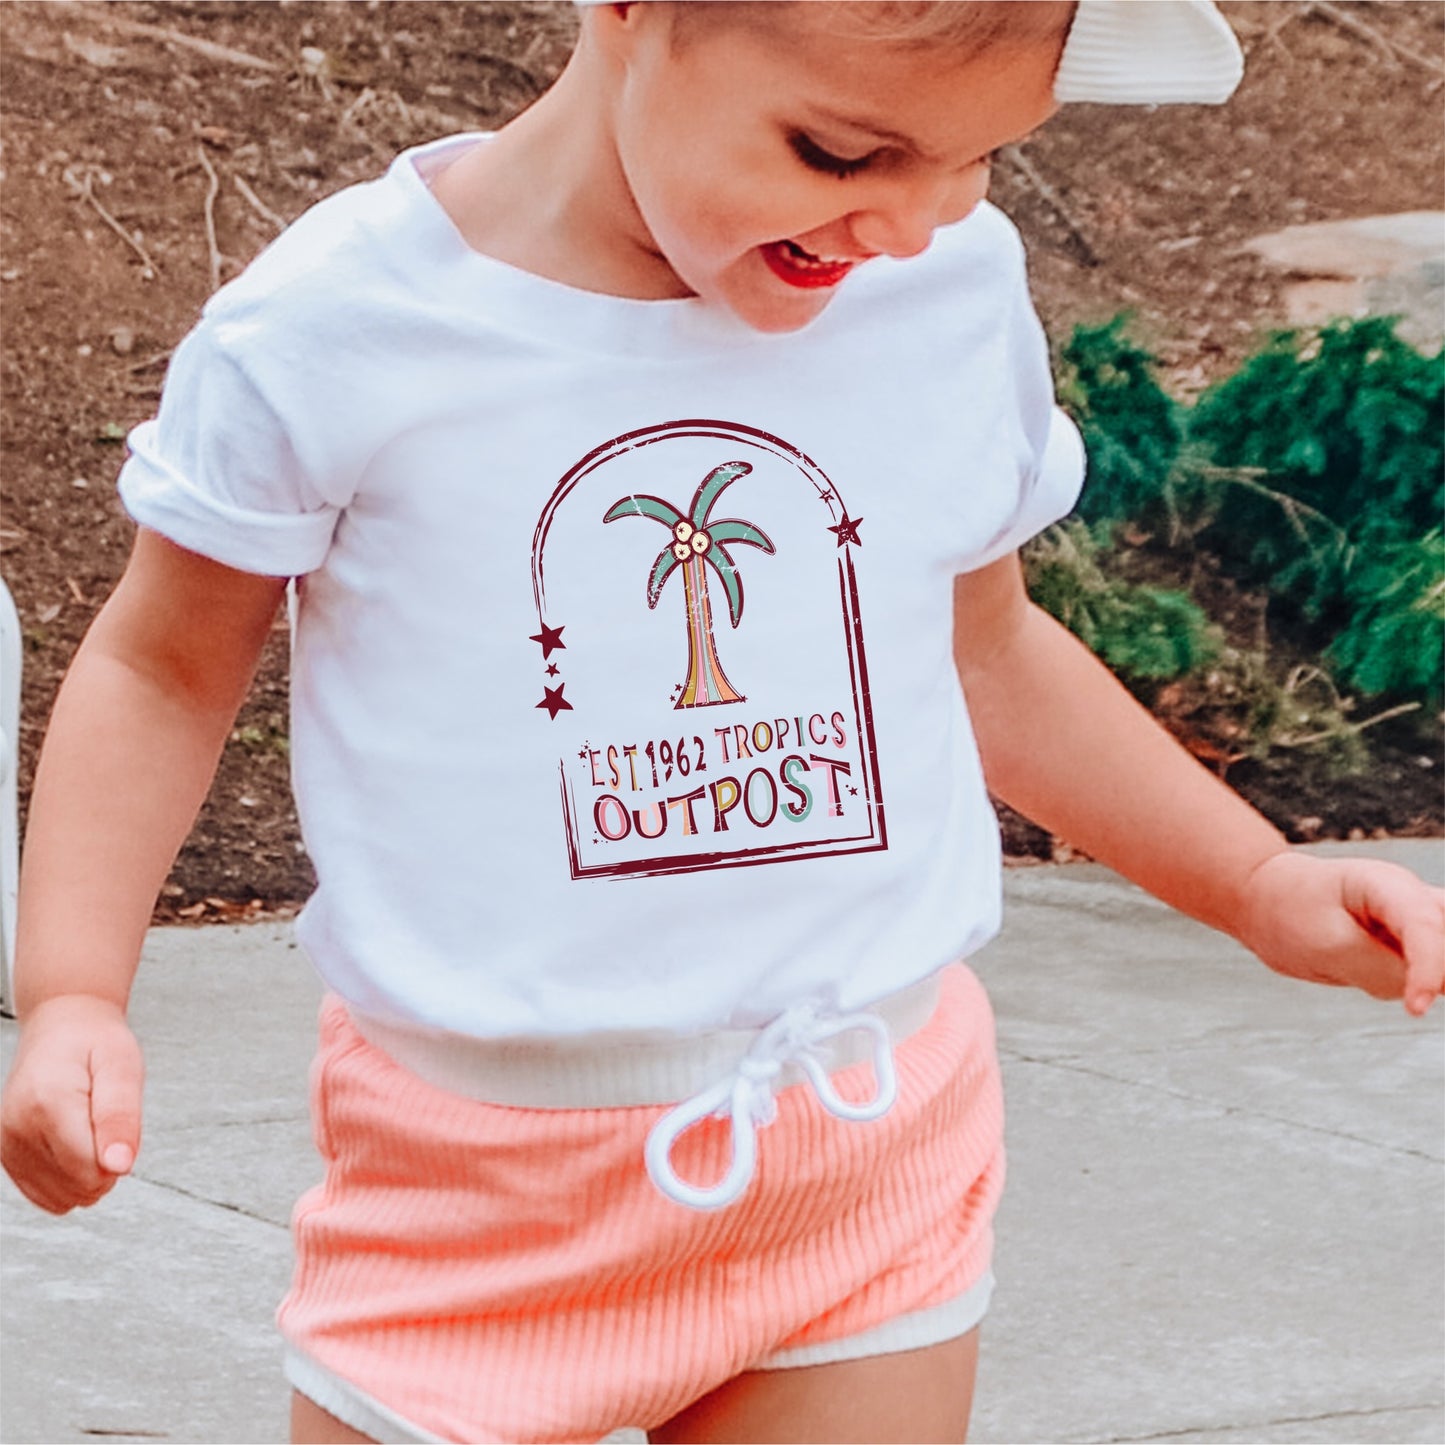 "Est. 1962 Tropics Outpost" Groovy Palm Trees The Peachy Dot Iron on heat transfer.